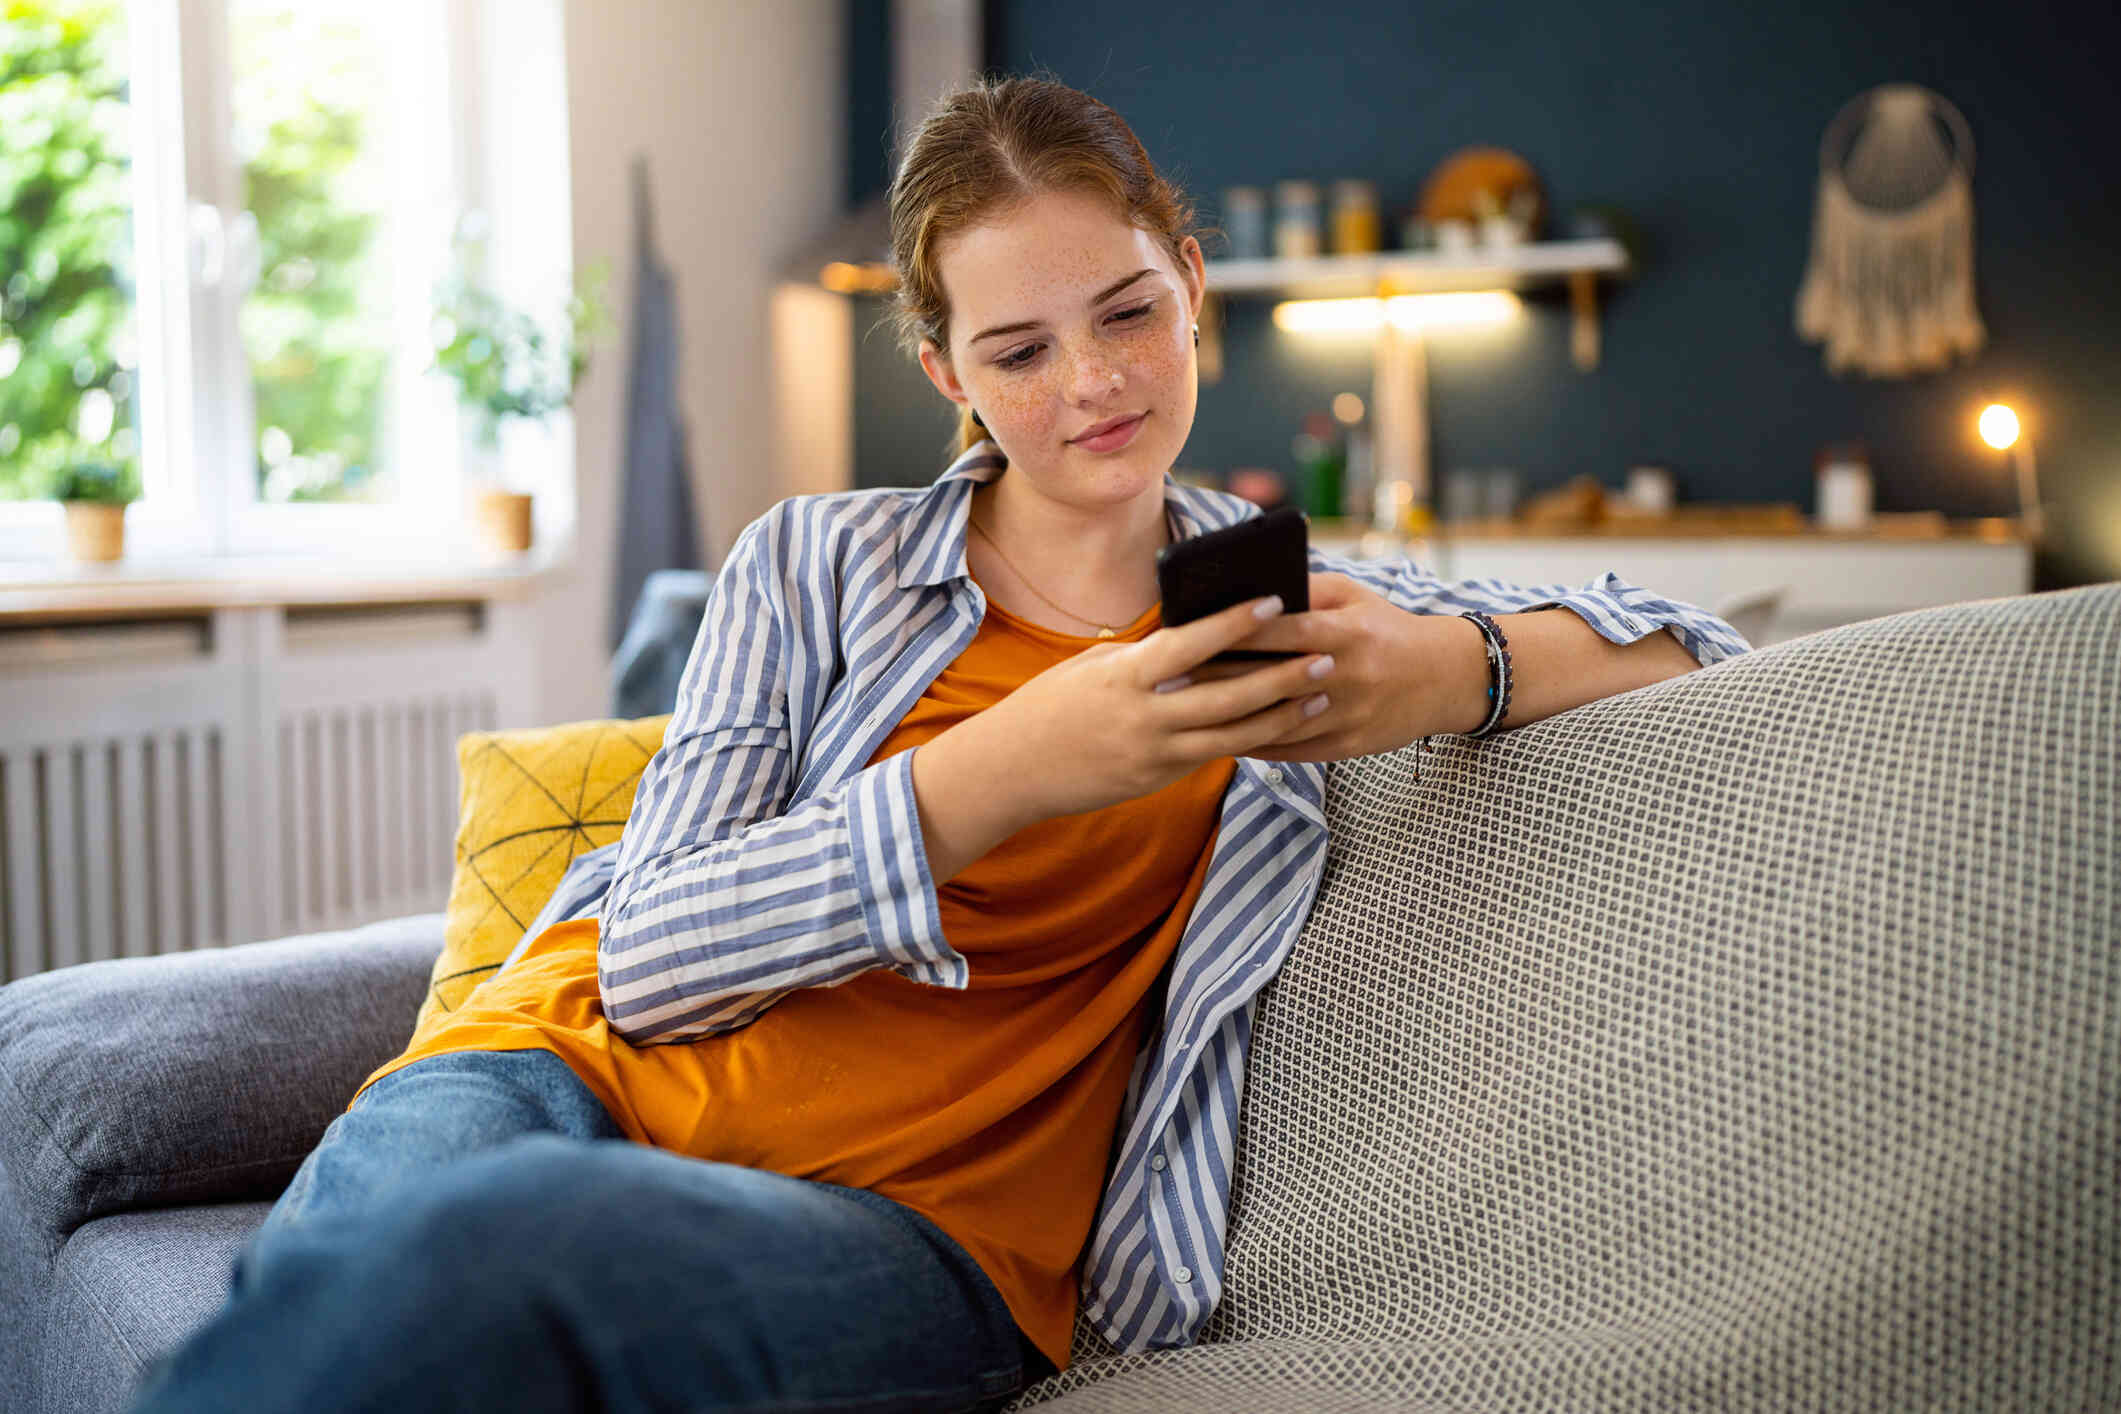 A teen girl in an roange shirt sits casually on the couch and looks down at the cellphone in her hand with a cuious expression.